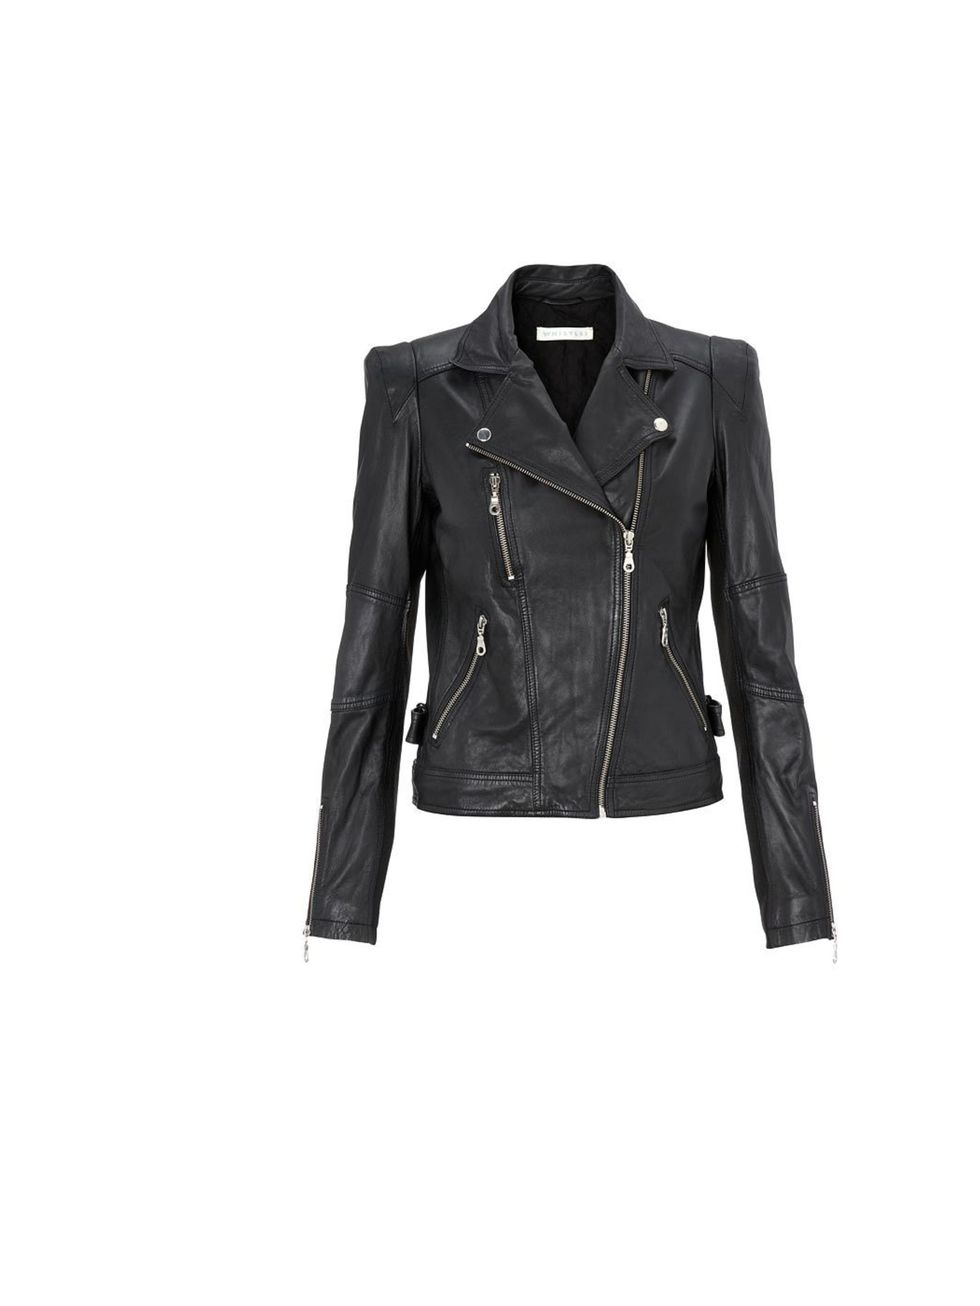 <p><a href="http://www.whistles.co.uk/fcp/categorylist/dept/shop?resetFilters=true">Whistles</a> extended shoulder leather jacket, £295</p>